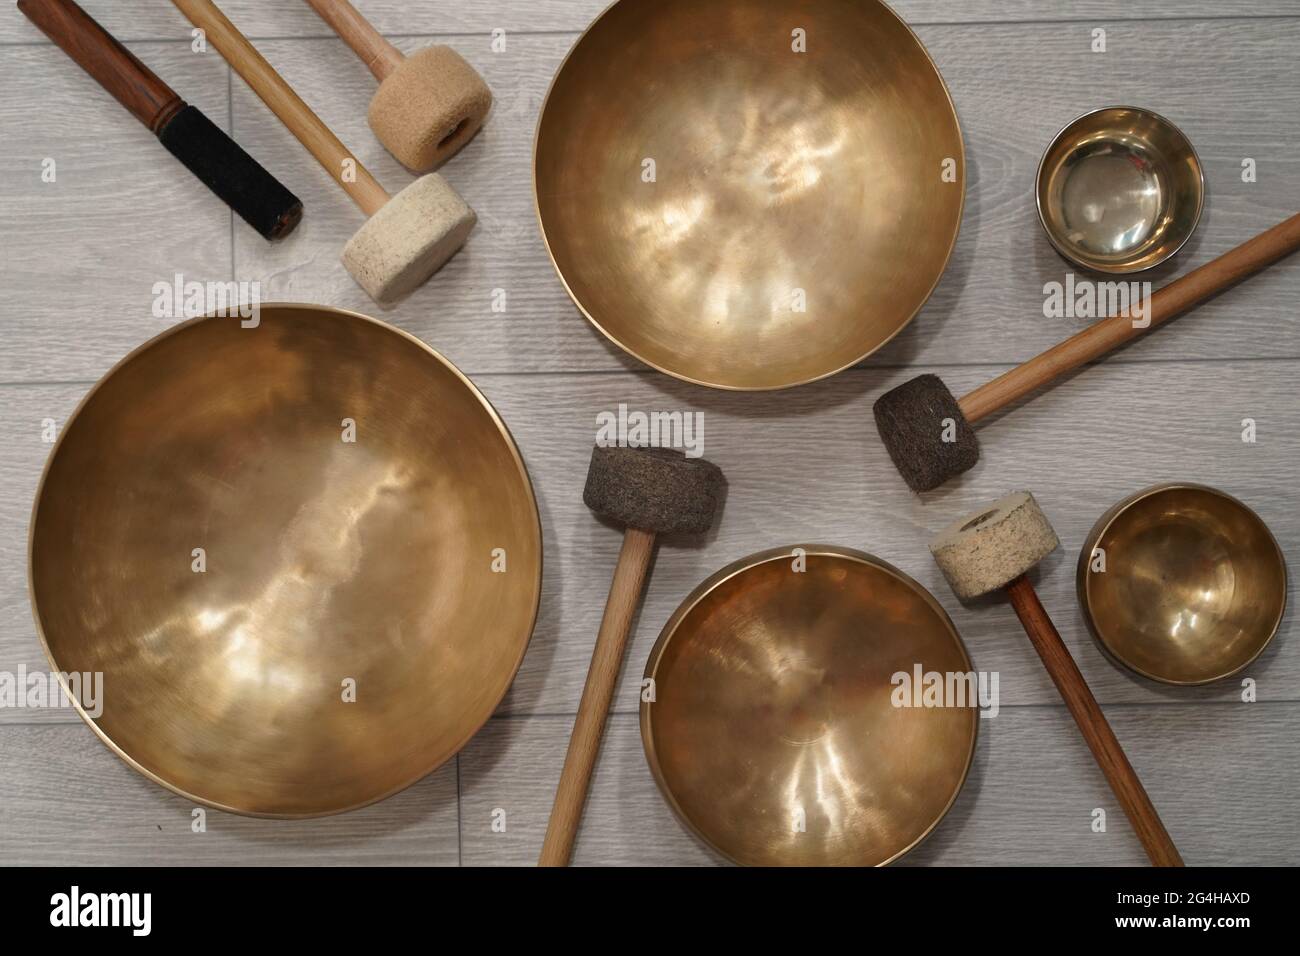 https://c8.alamy.com/comp/2G4HAXD/gong-yoga-close-up-on-instruments-for-sound-relaxation-and-meditation-2G4HAXD.jpg